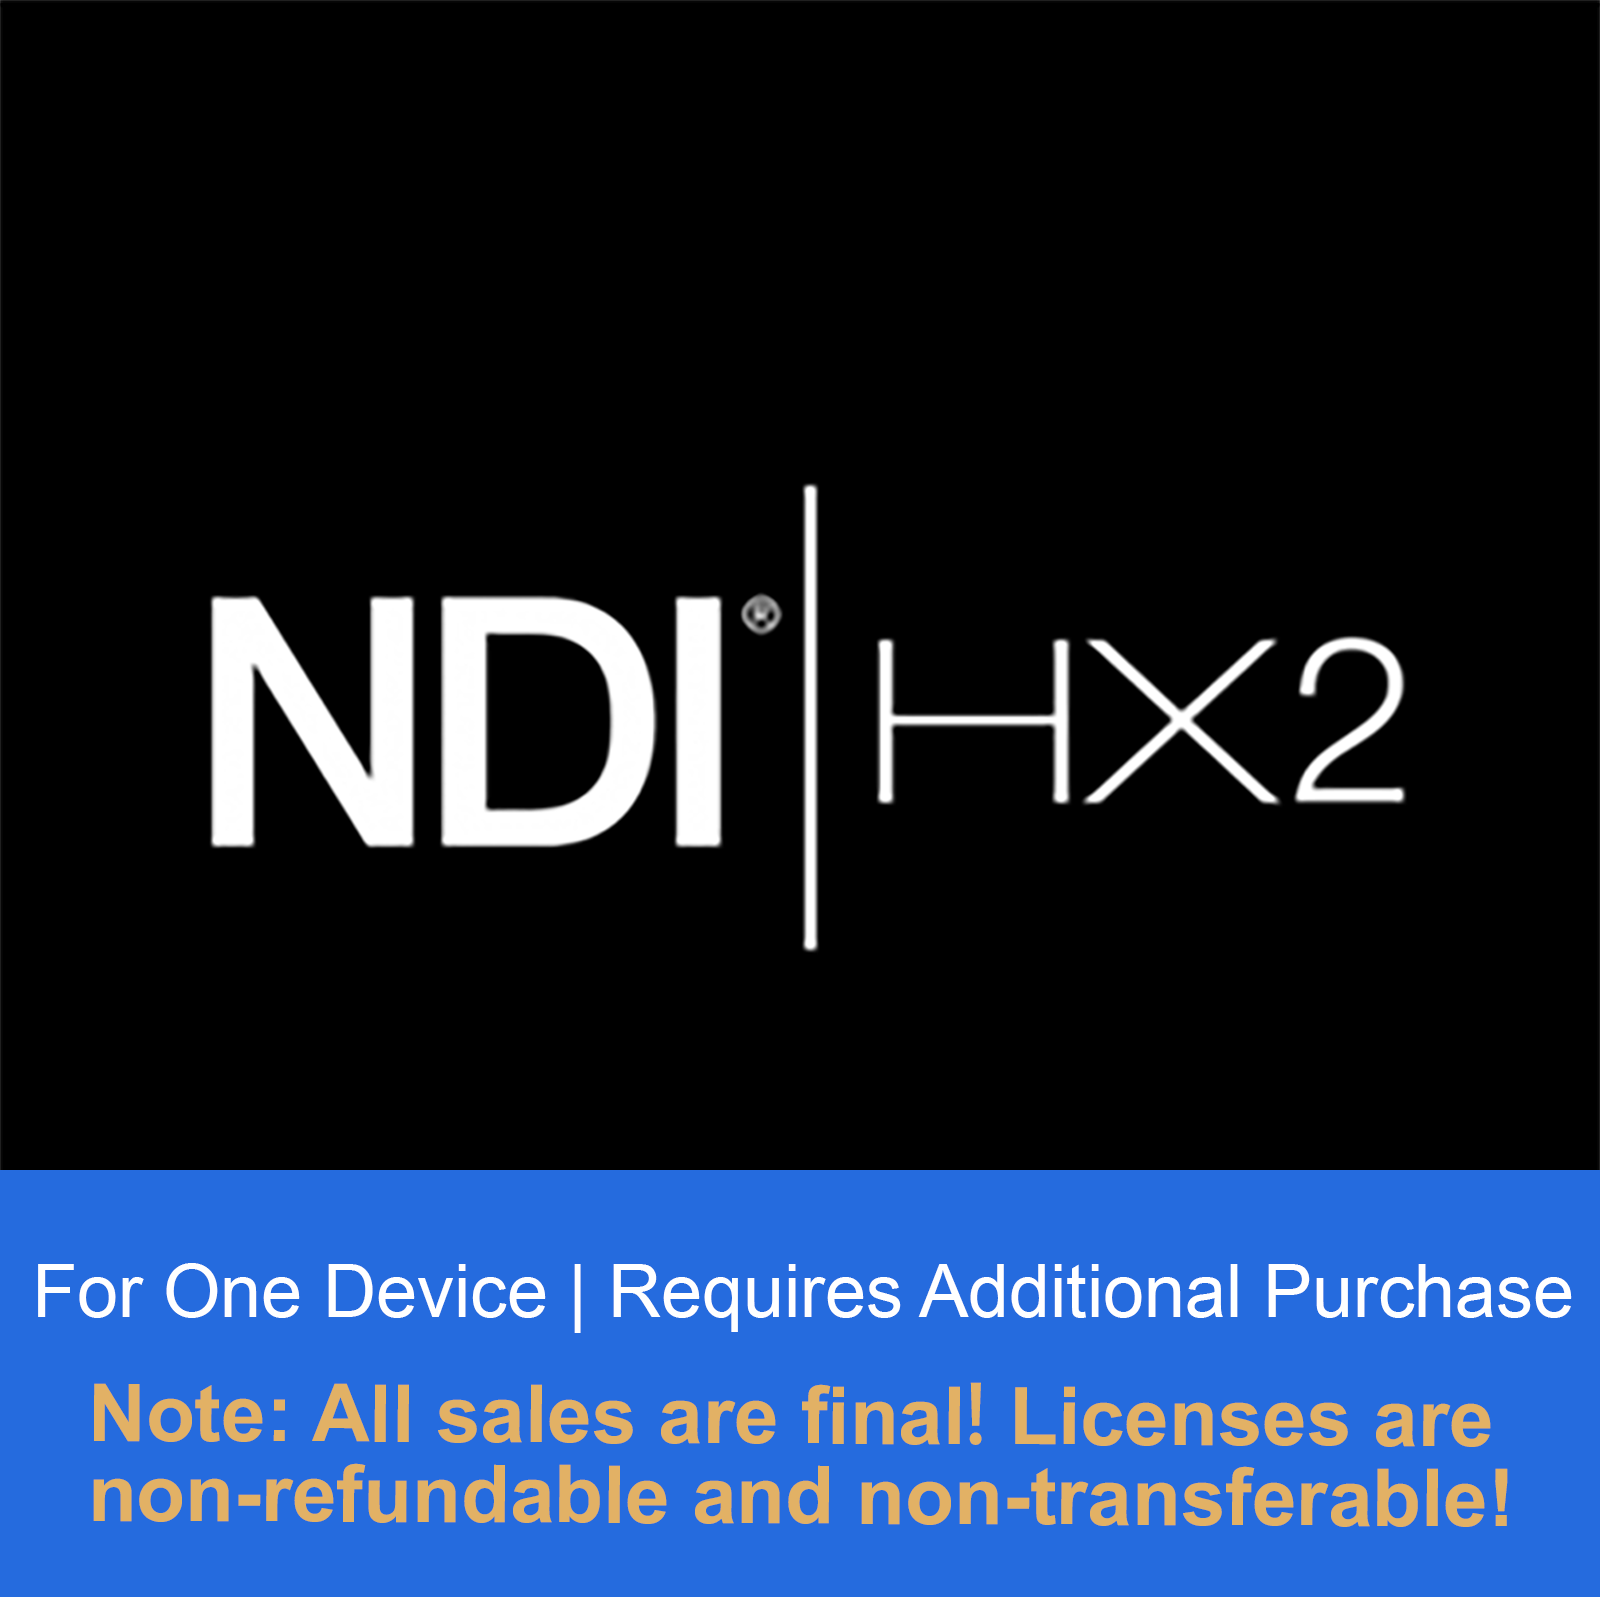 NDI License Key requires separate purchase